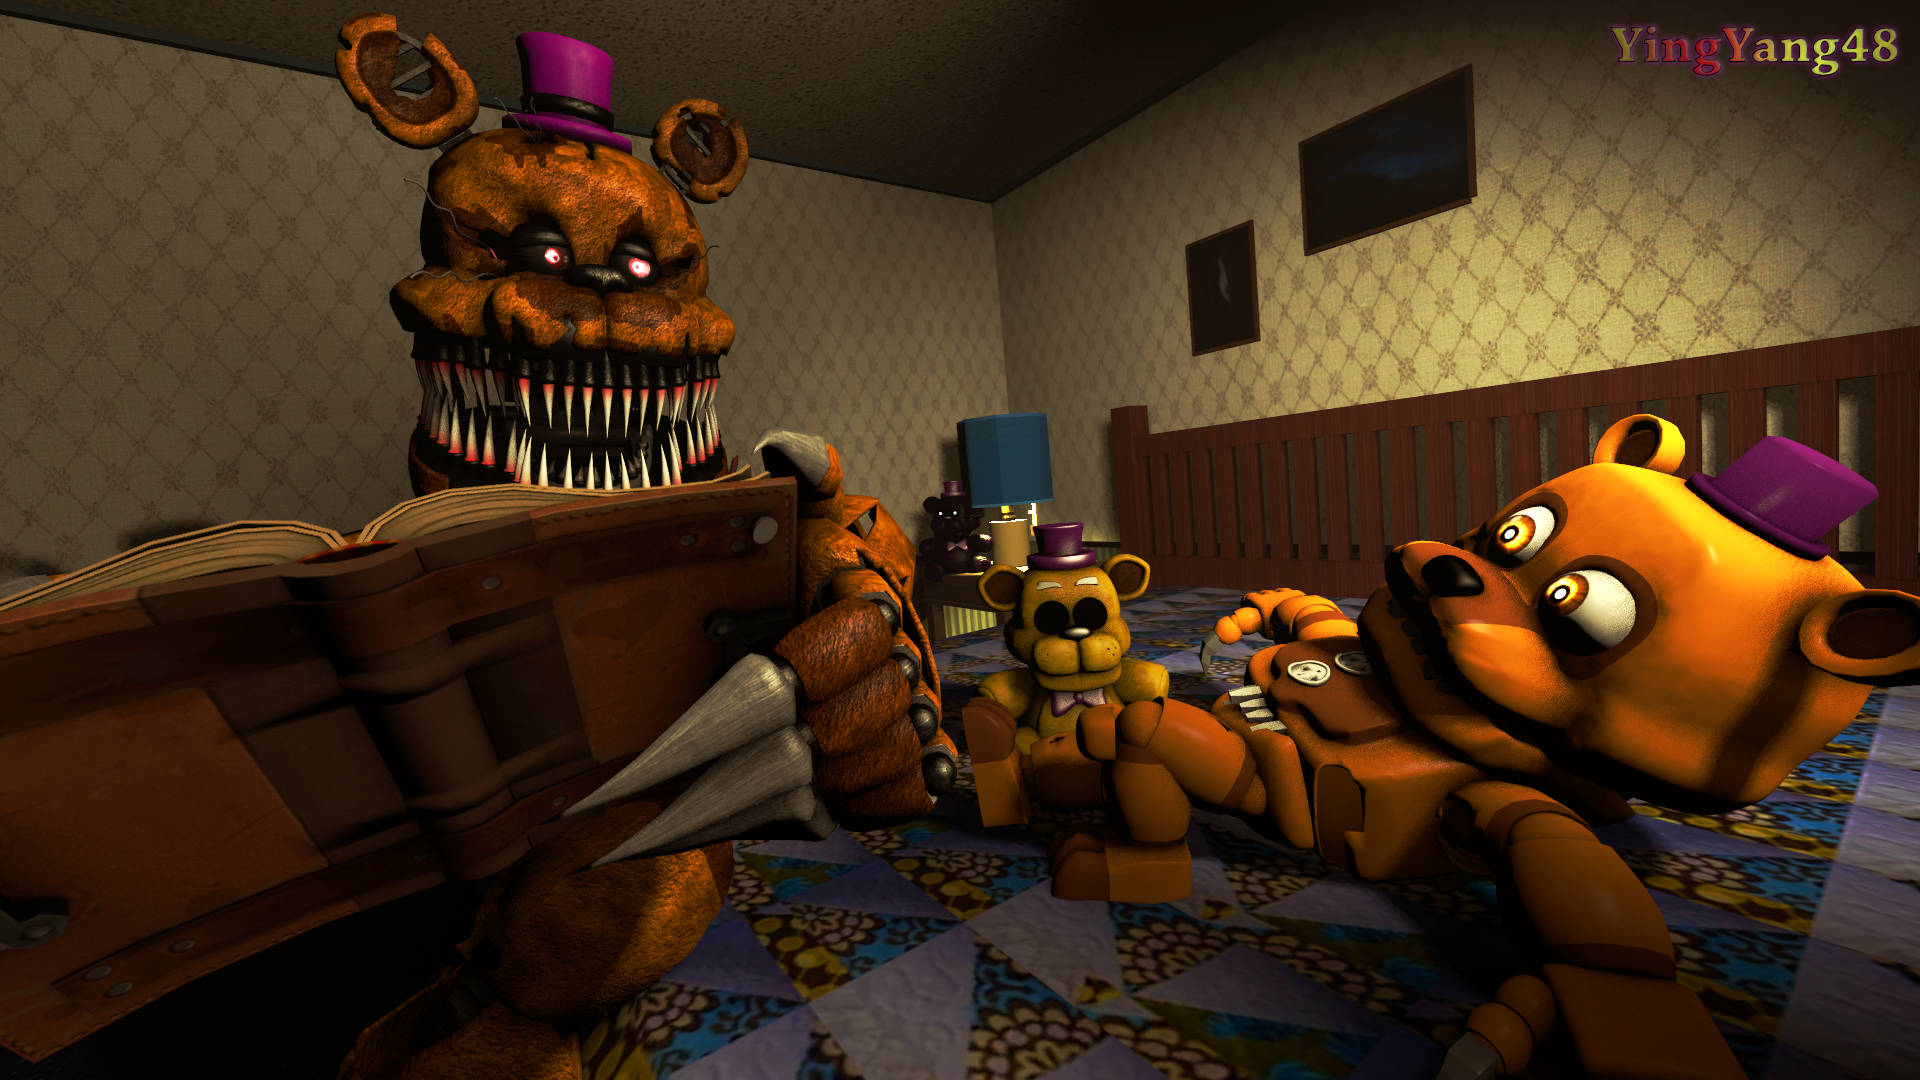 Nightmare Freddy Bed Time Story Background